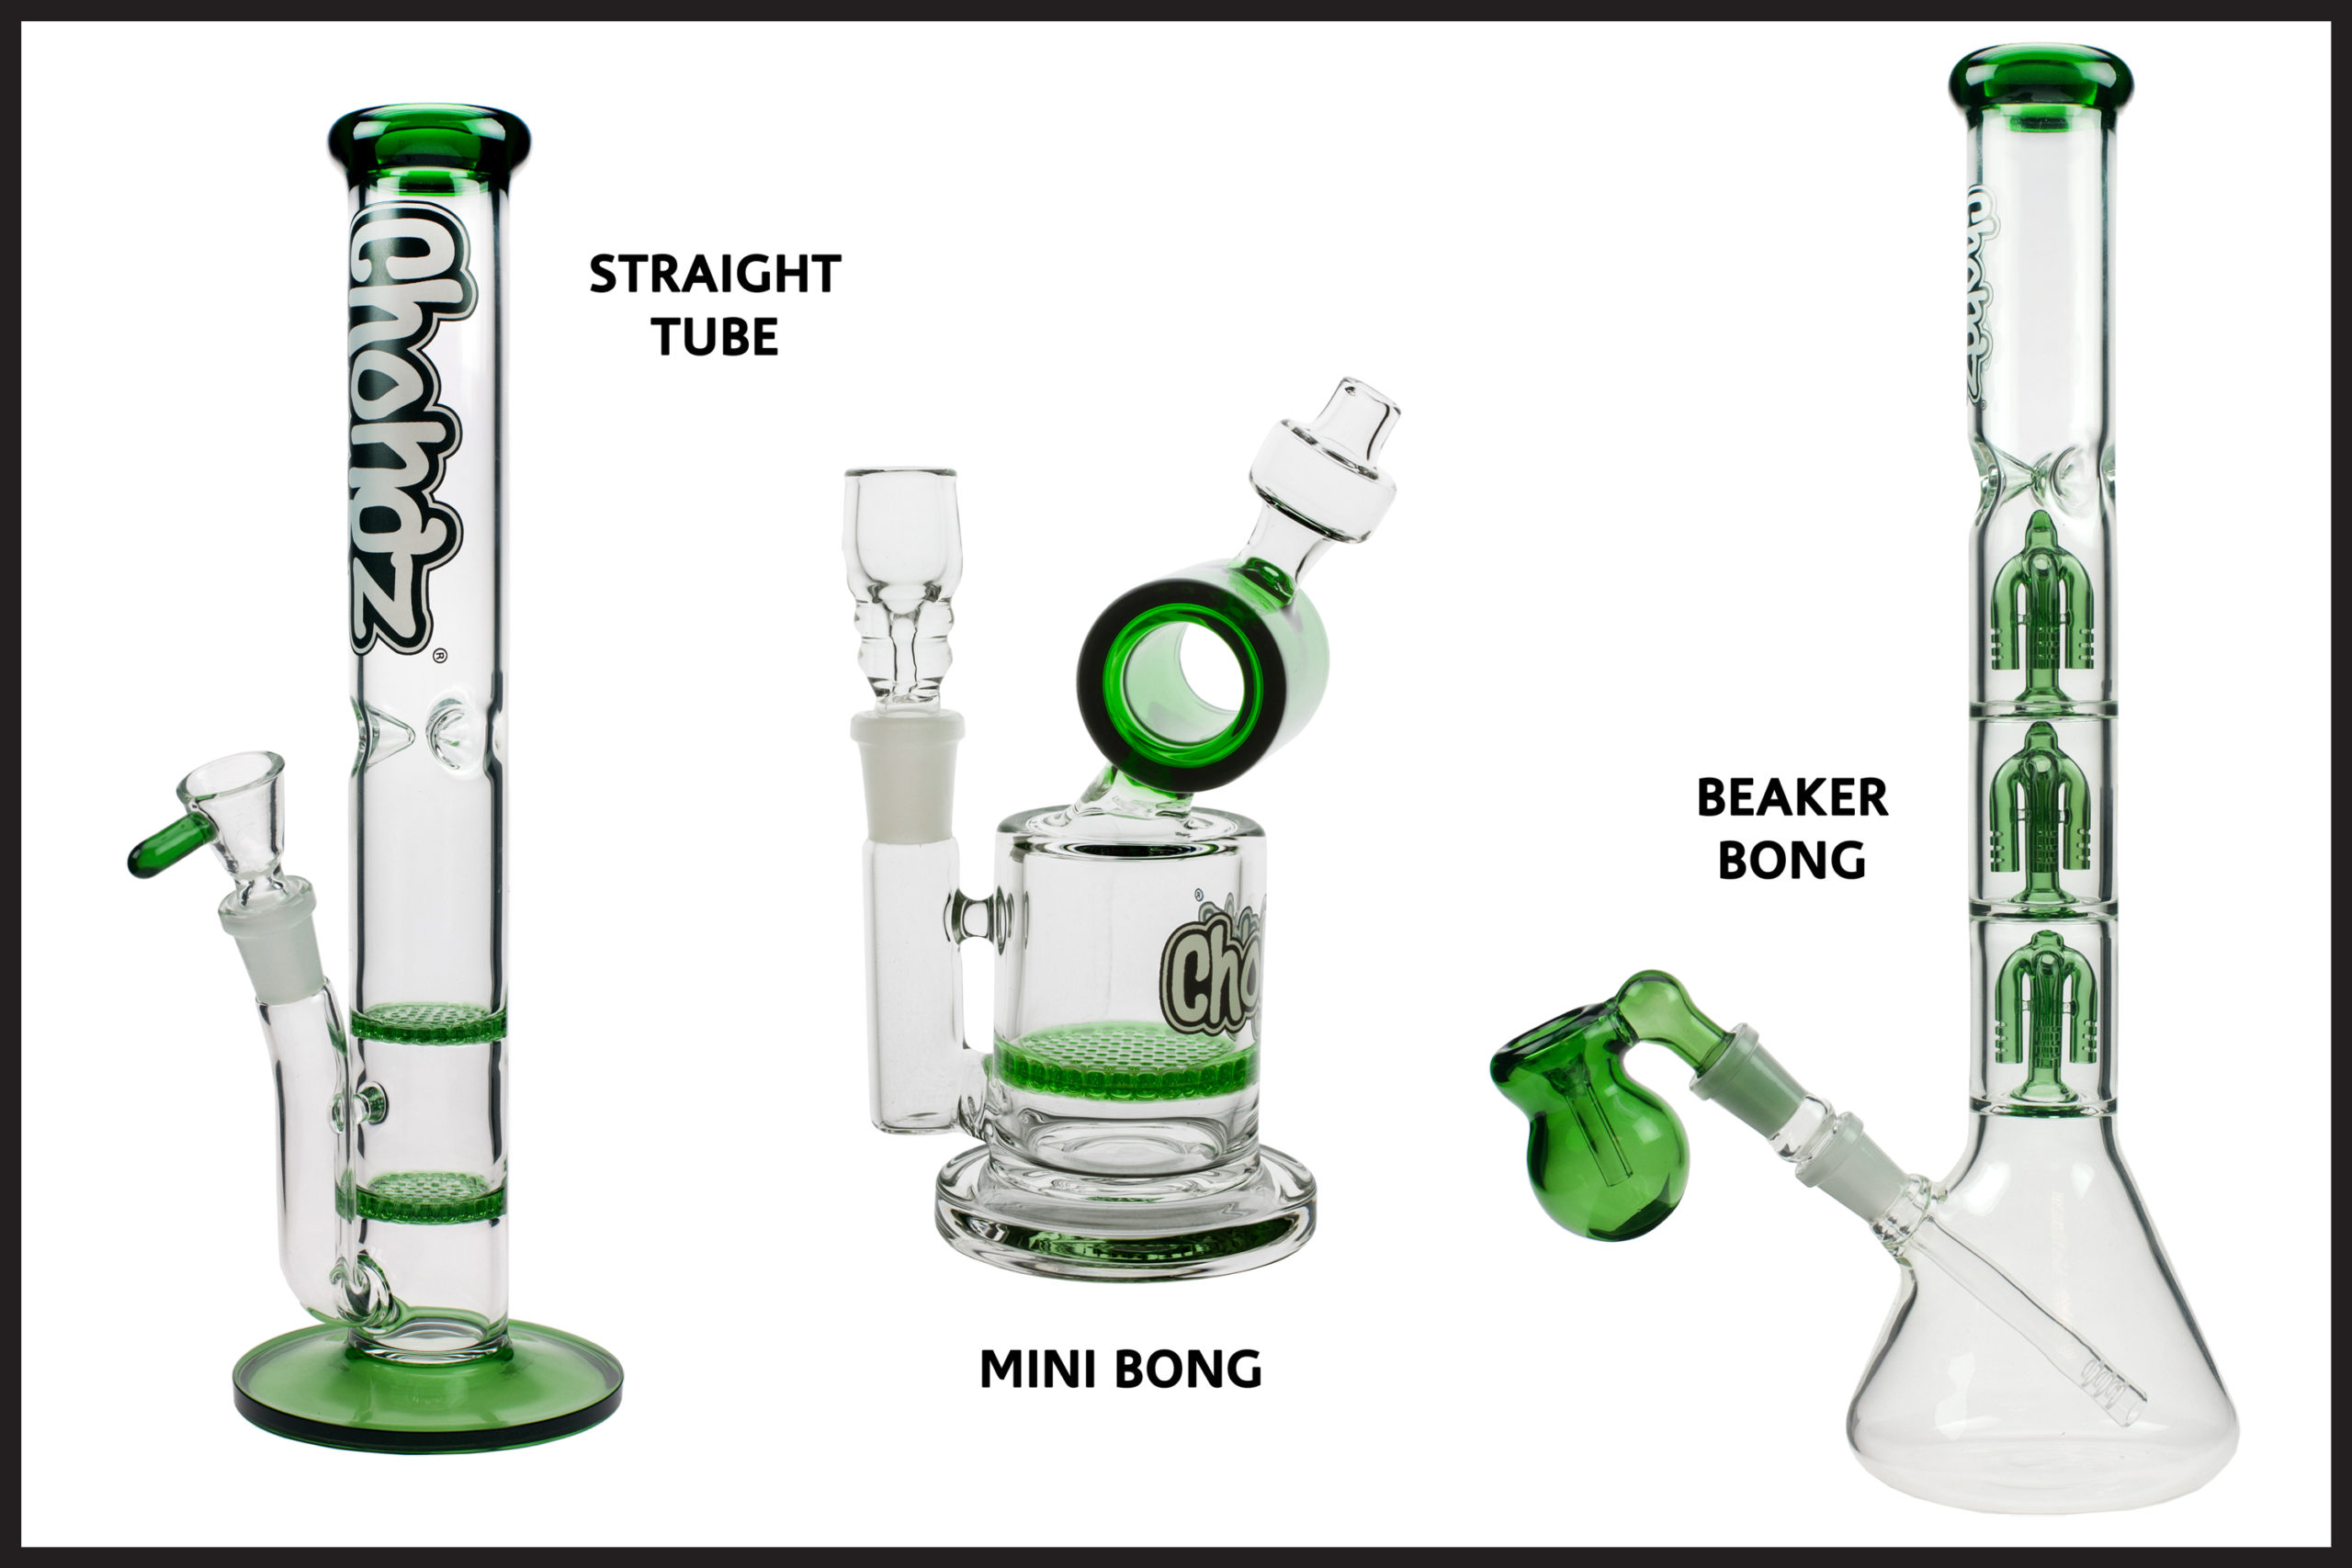 What Are The Variation In The Cost Of The Bongs Available For People?